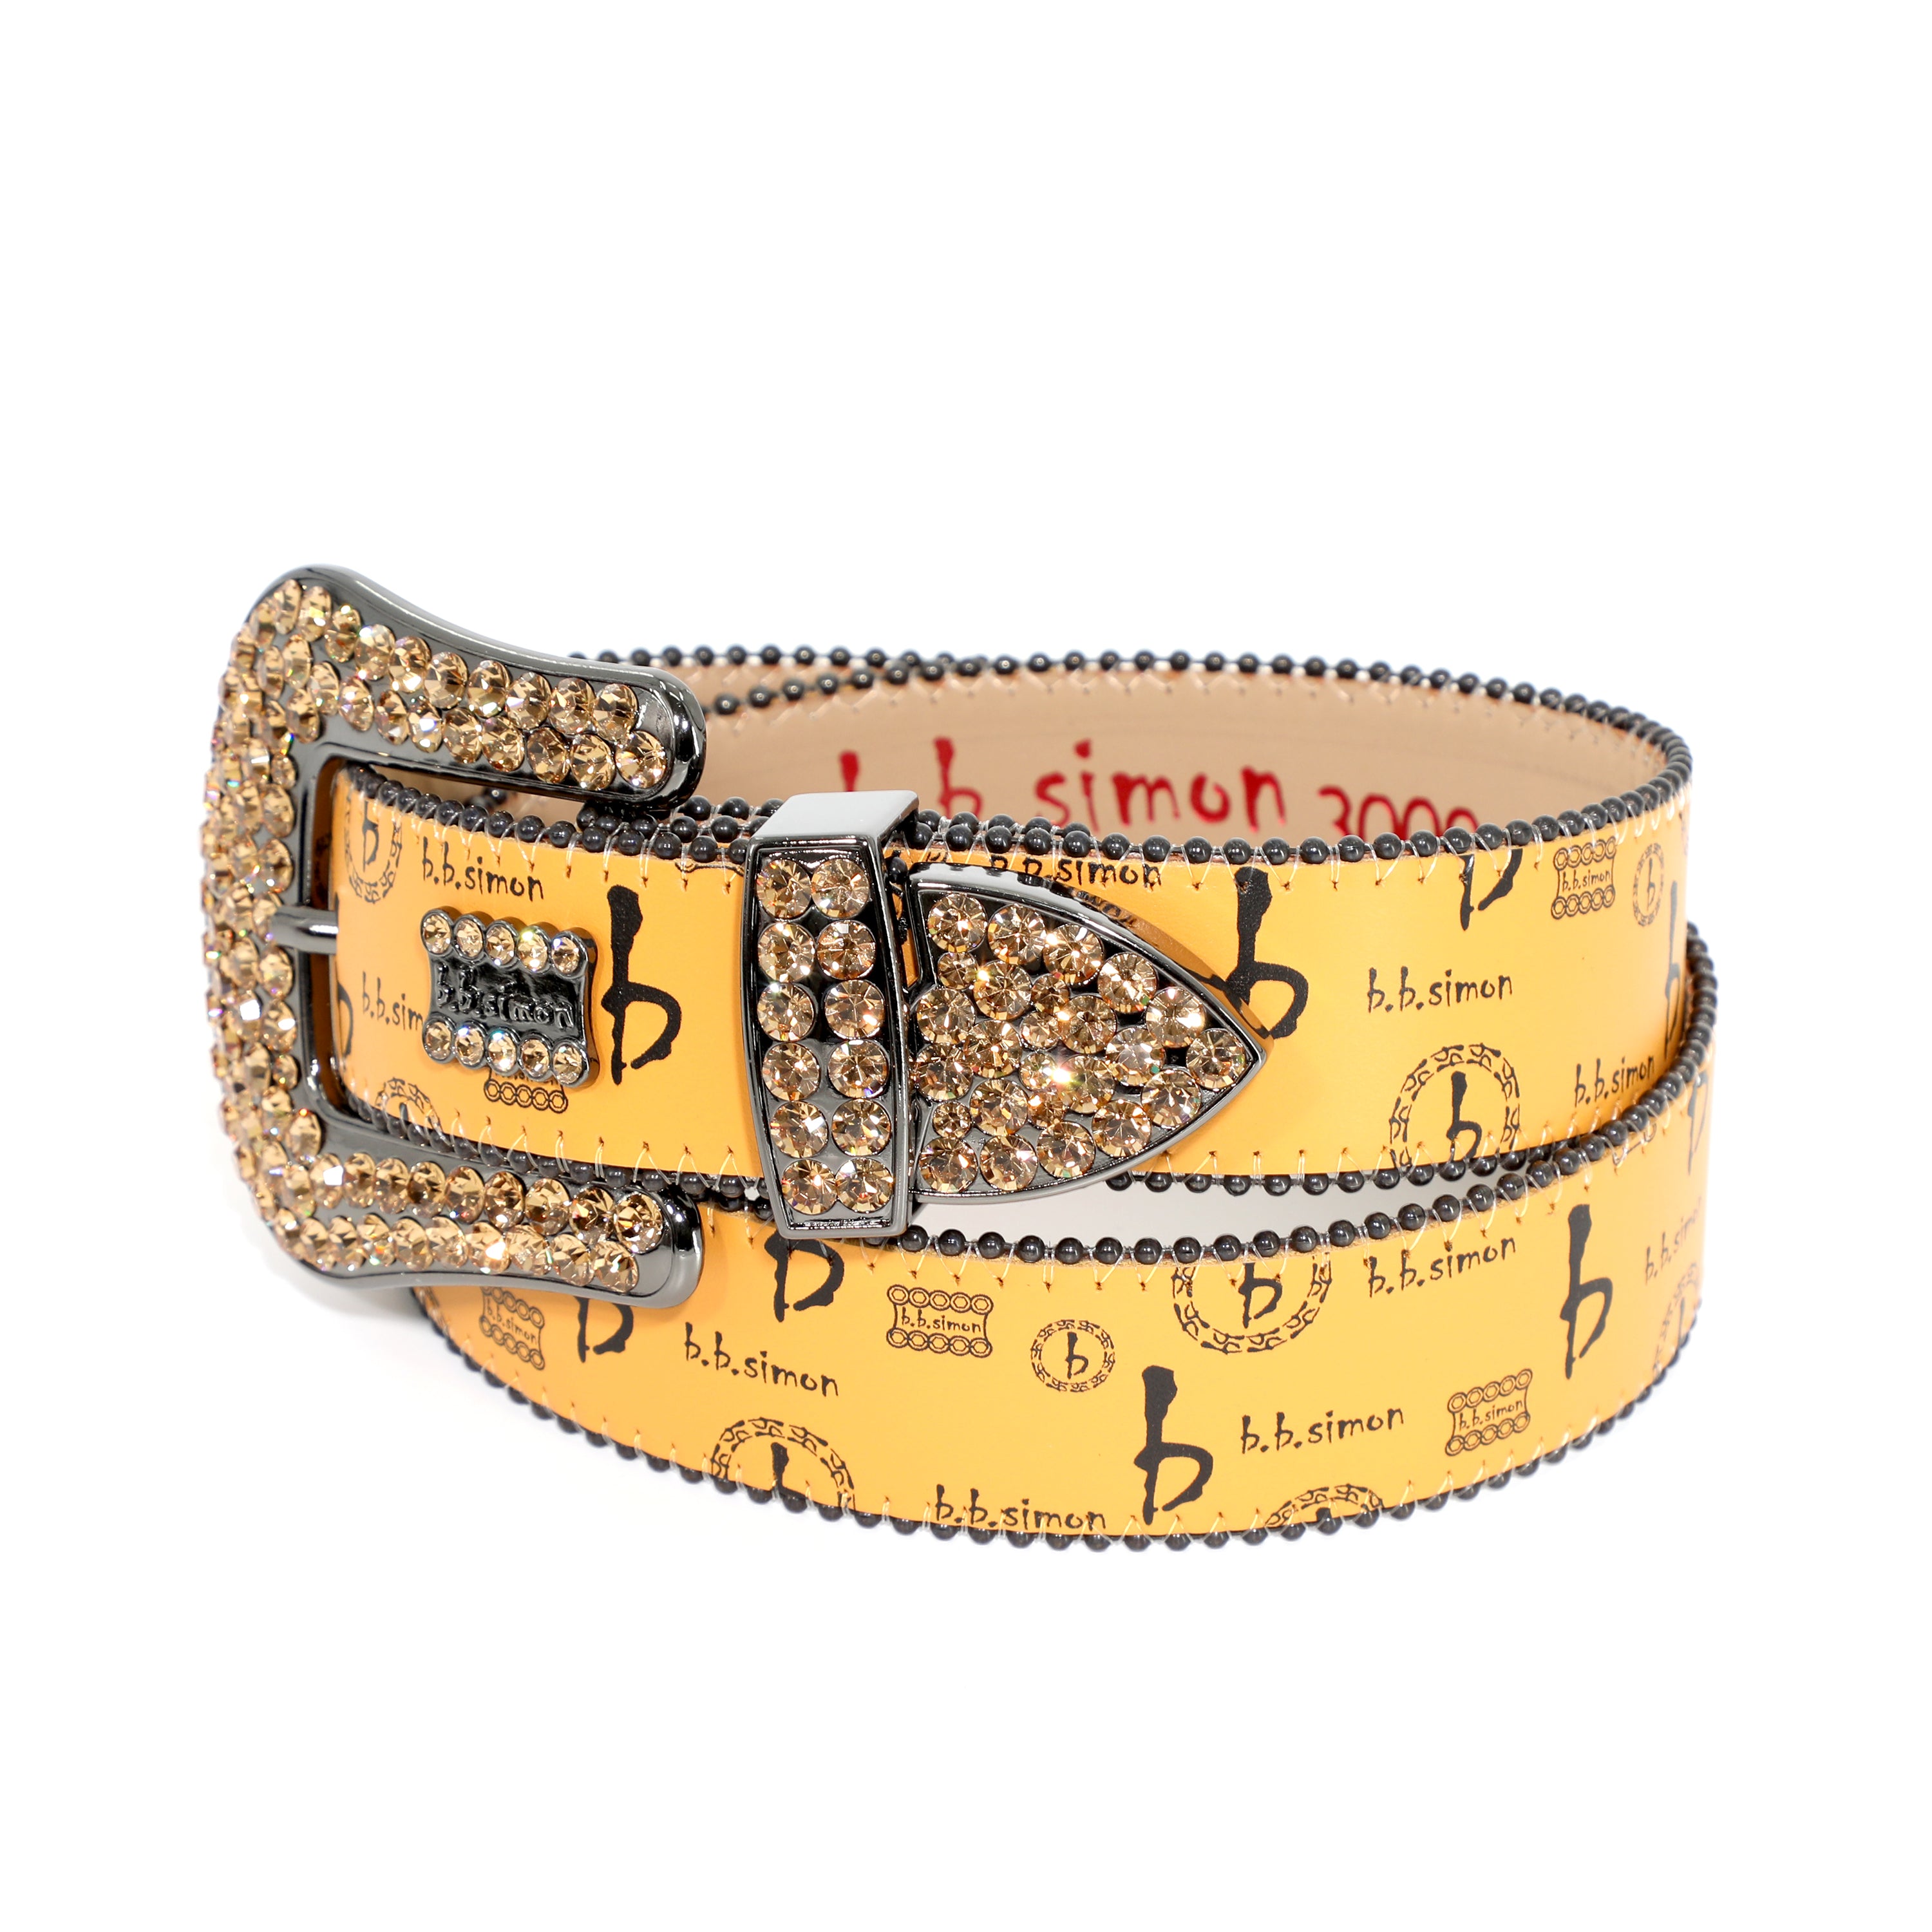 How to Tell if a B.B. Simon Belt is Fake